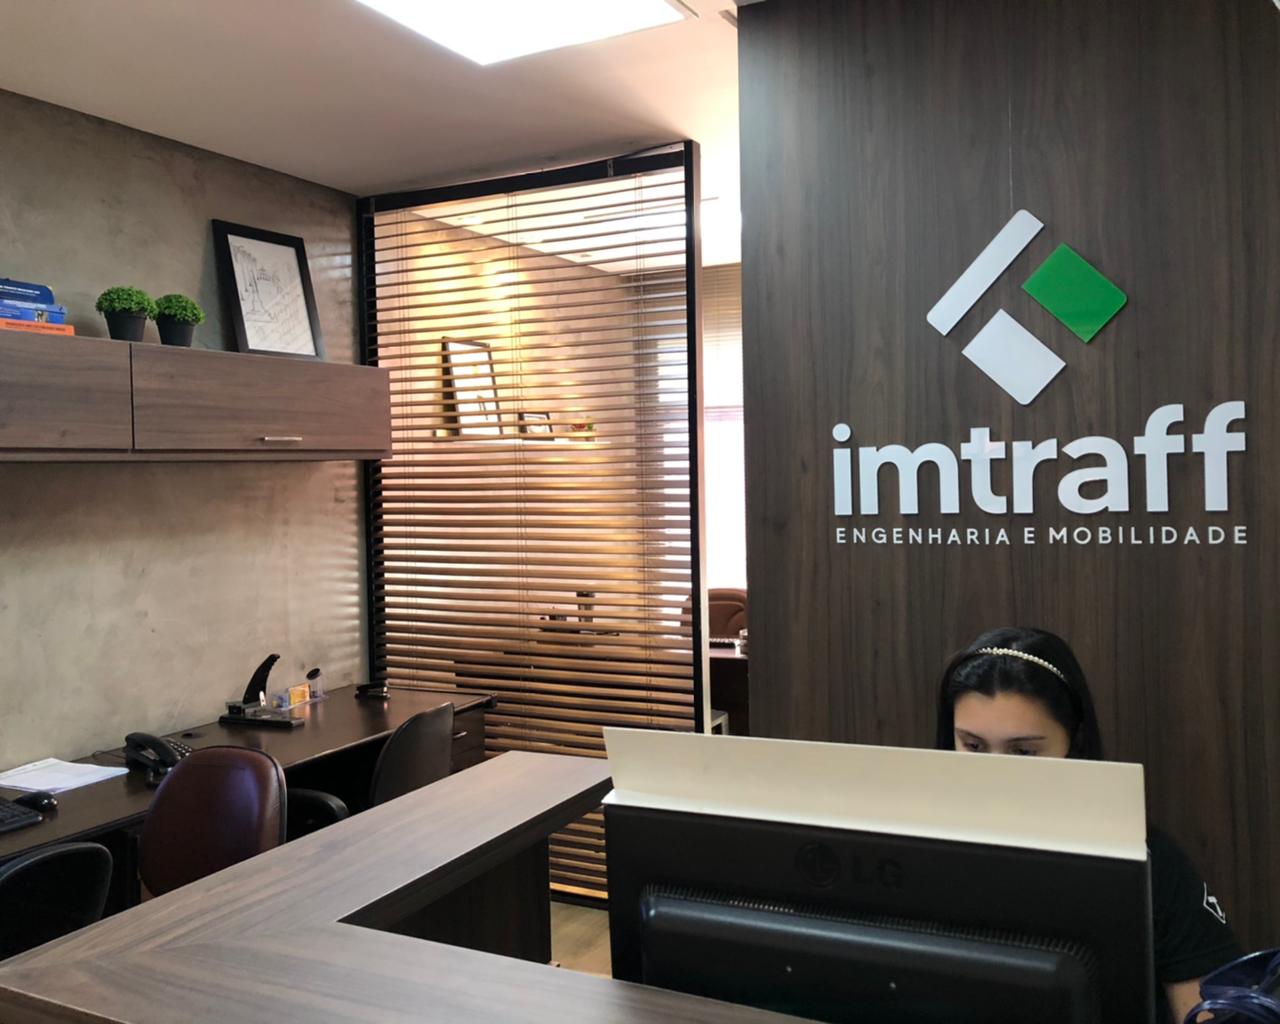 About to turn 11 years old, Imtraff starts 2021 with renovated headquarters and new logo